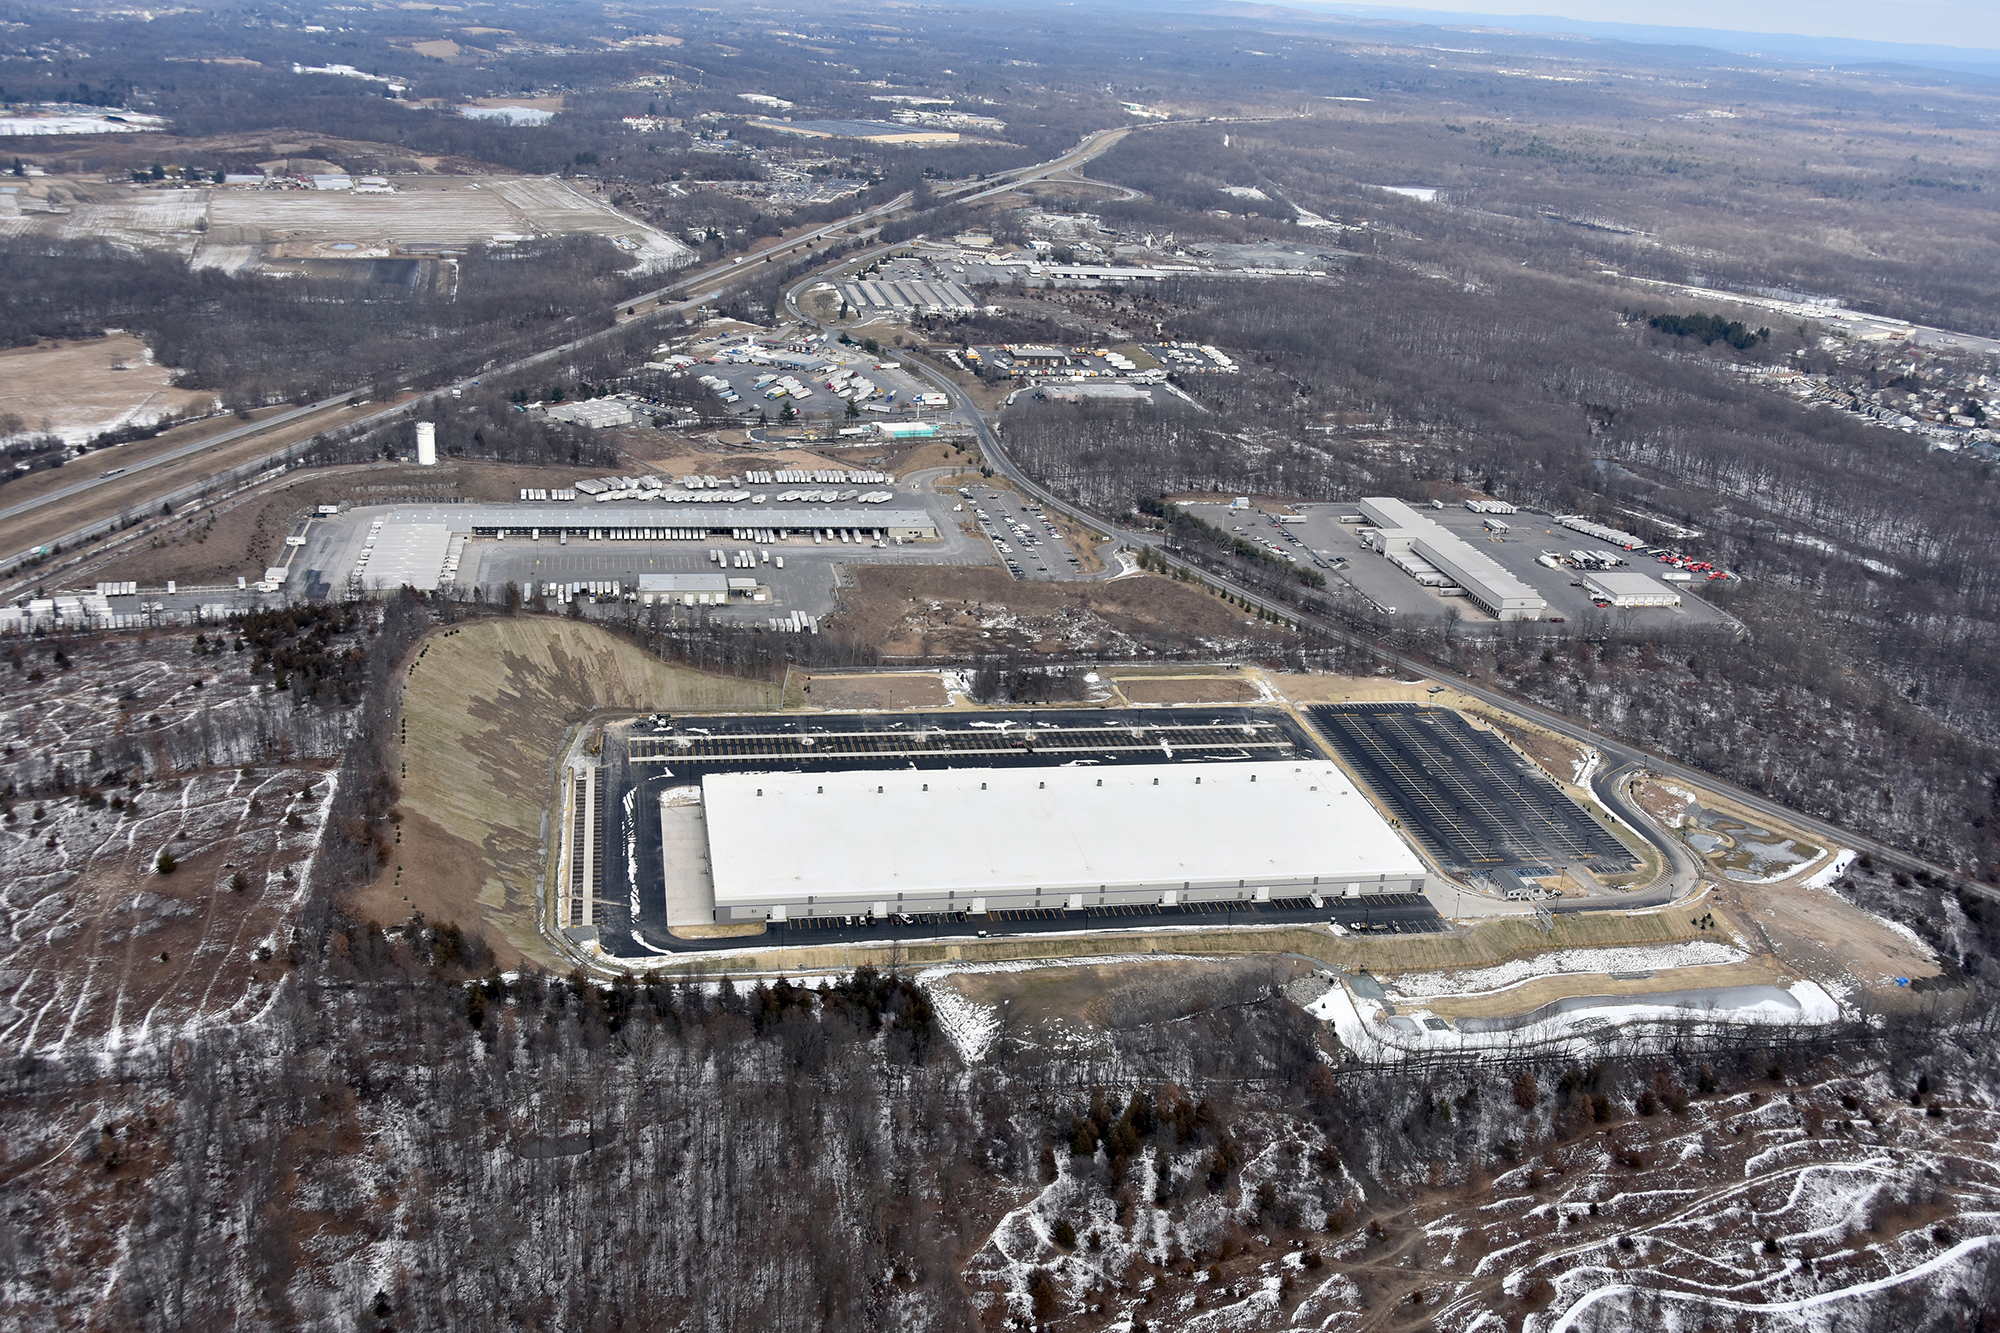 An aerial view of a large distribution warehouse in snowy conditions